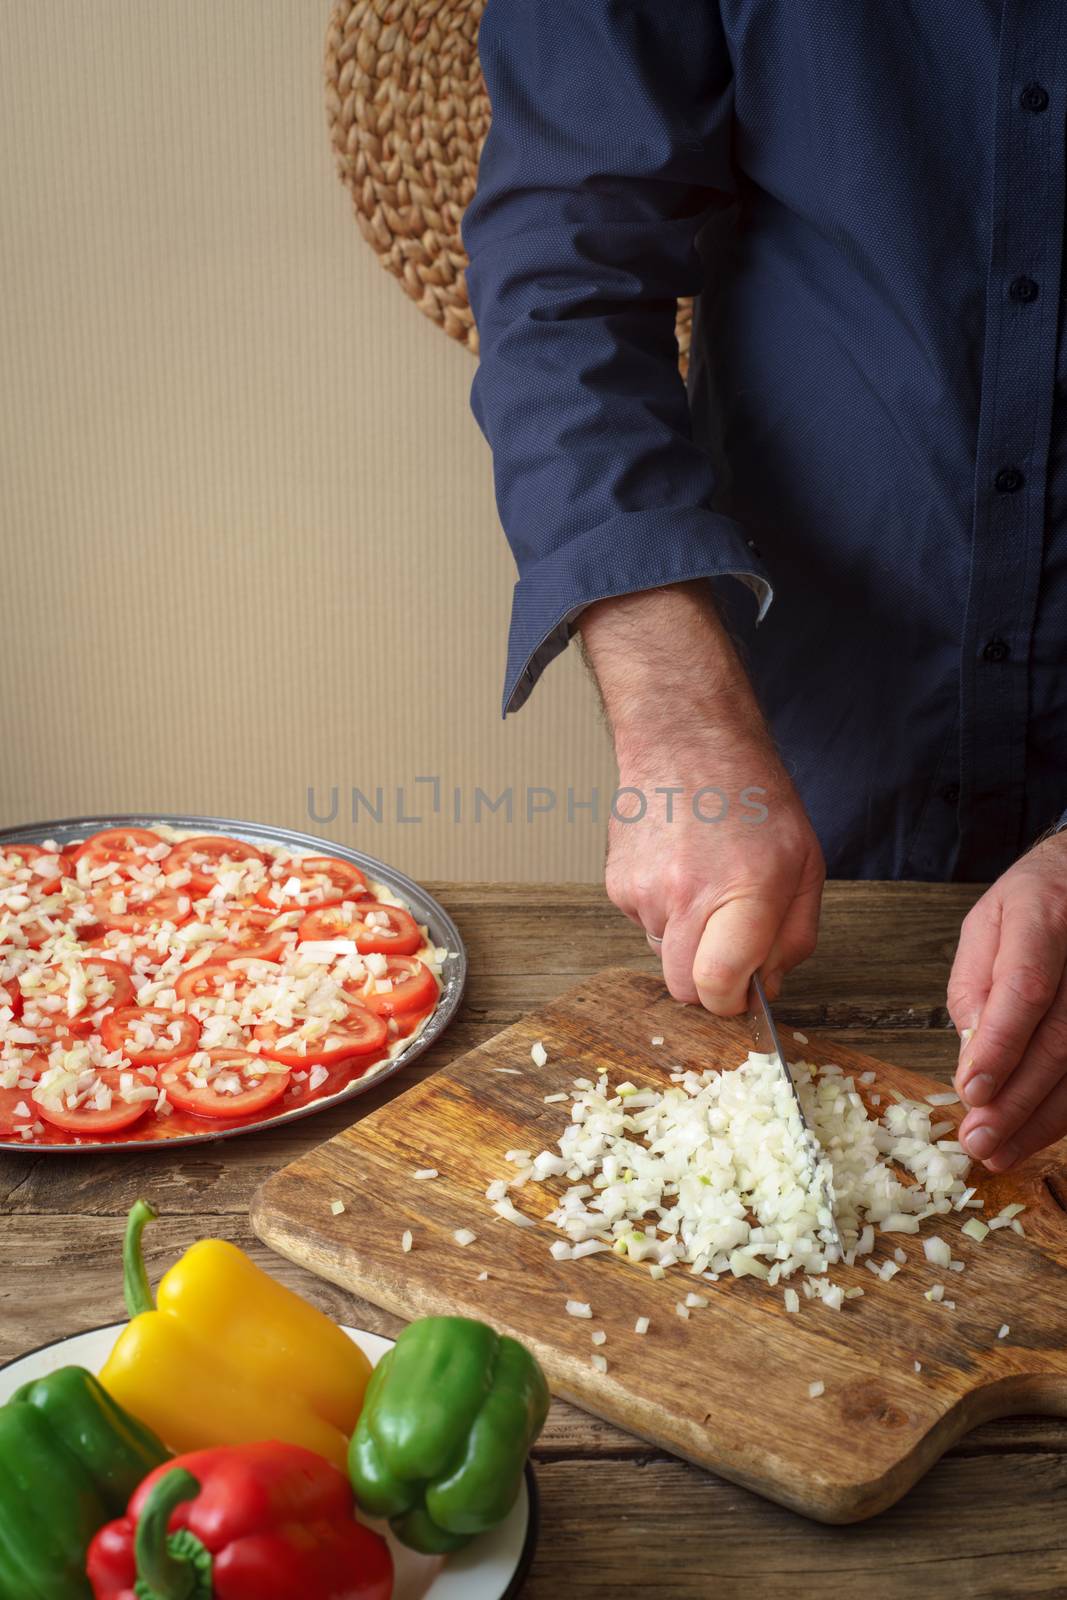 Man knife sliced onion pizza on a cutting board vertical